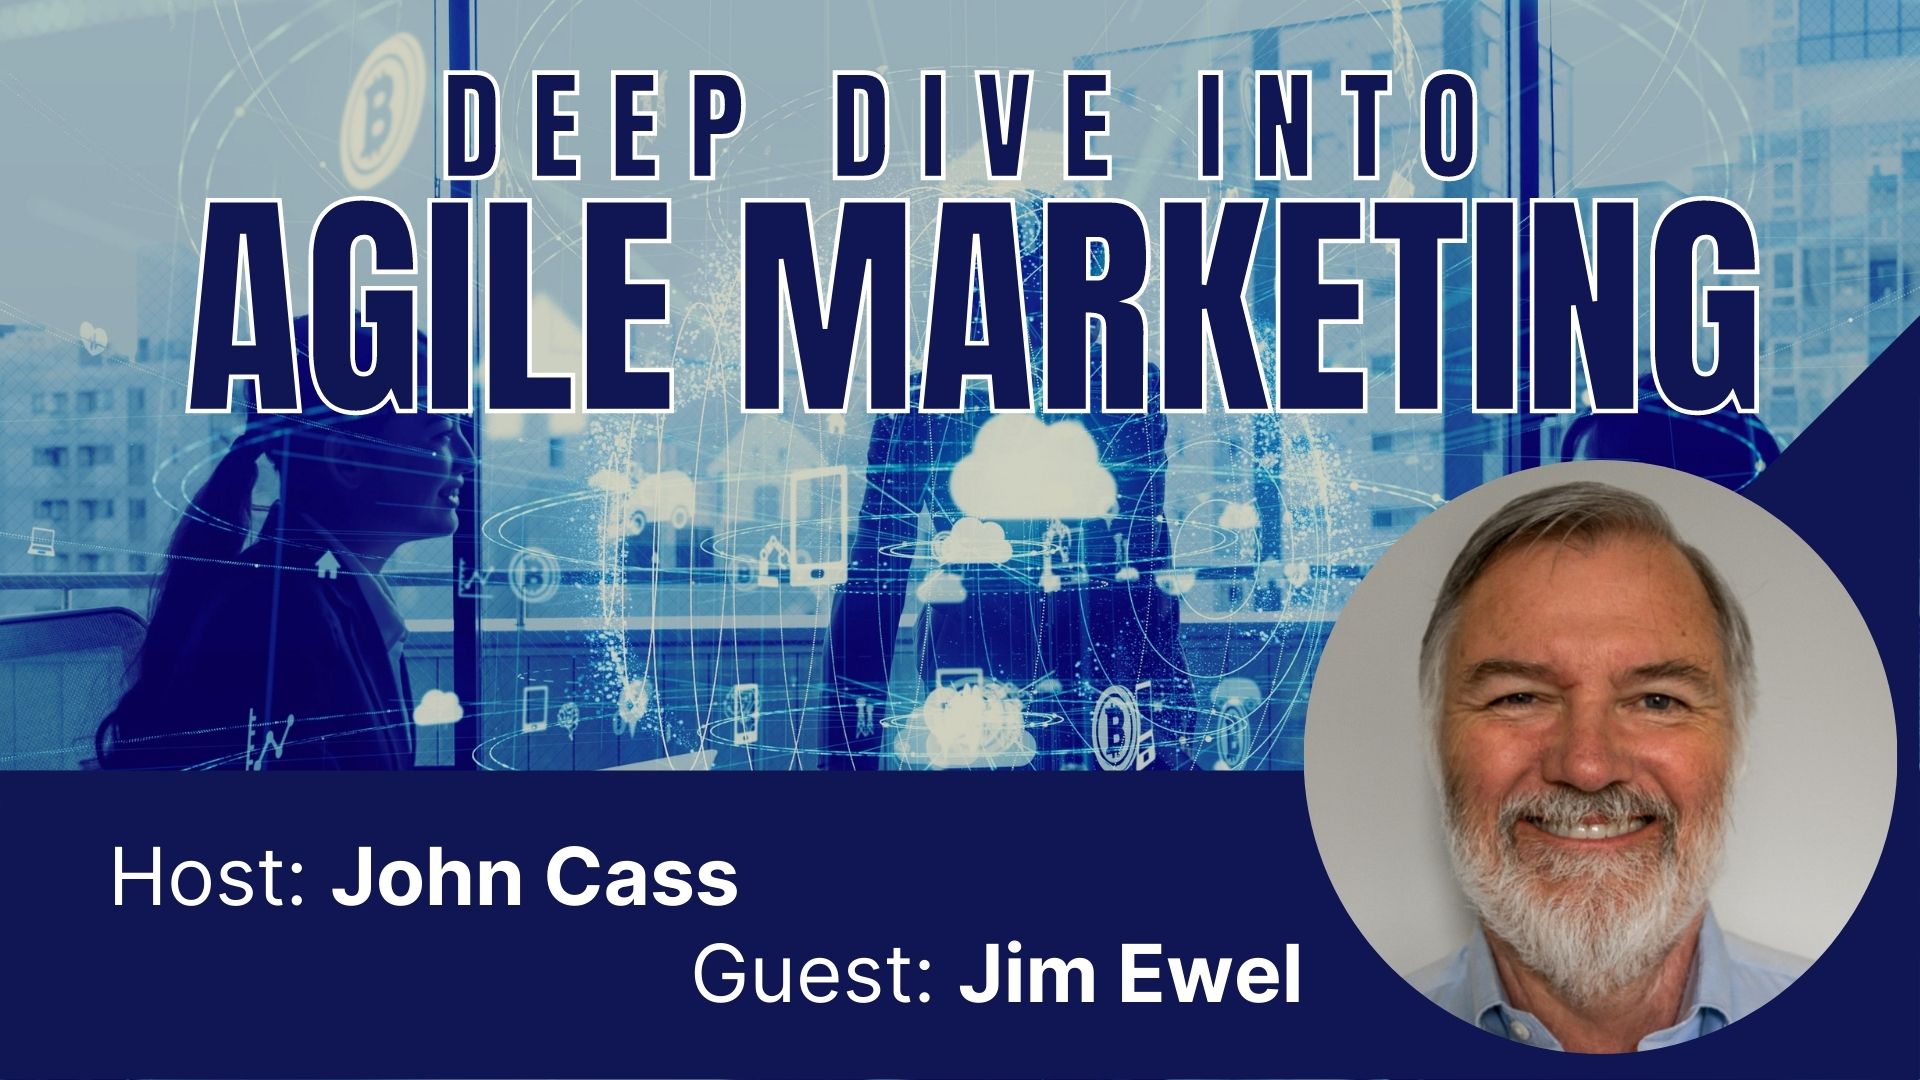 The Six Disciplines of Agile Marketing with with Jim Ewel